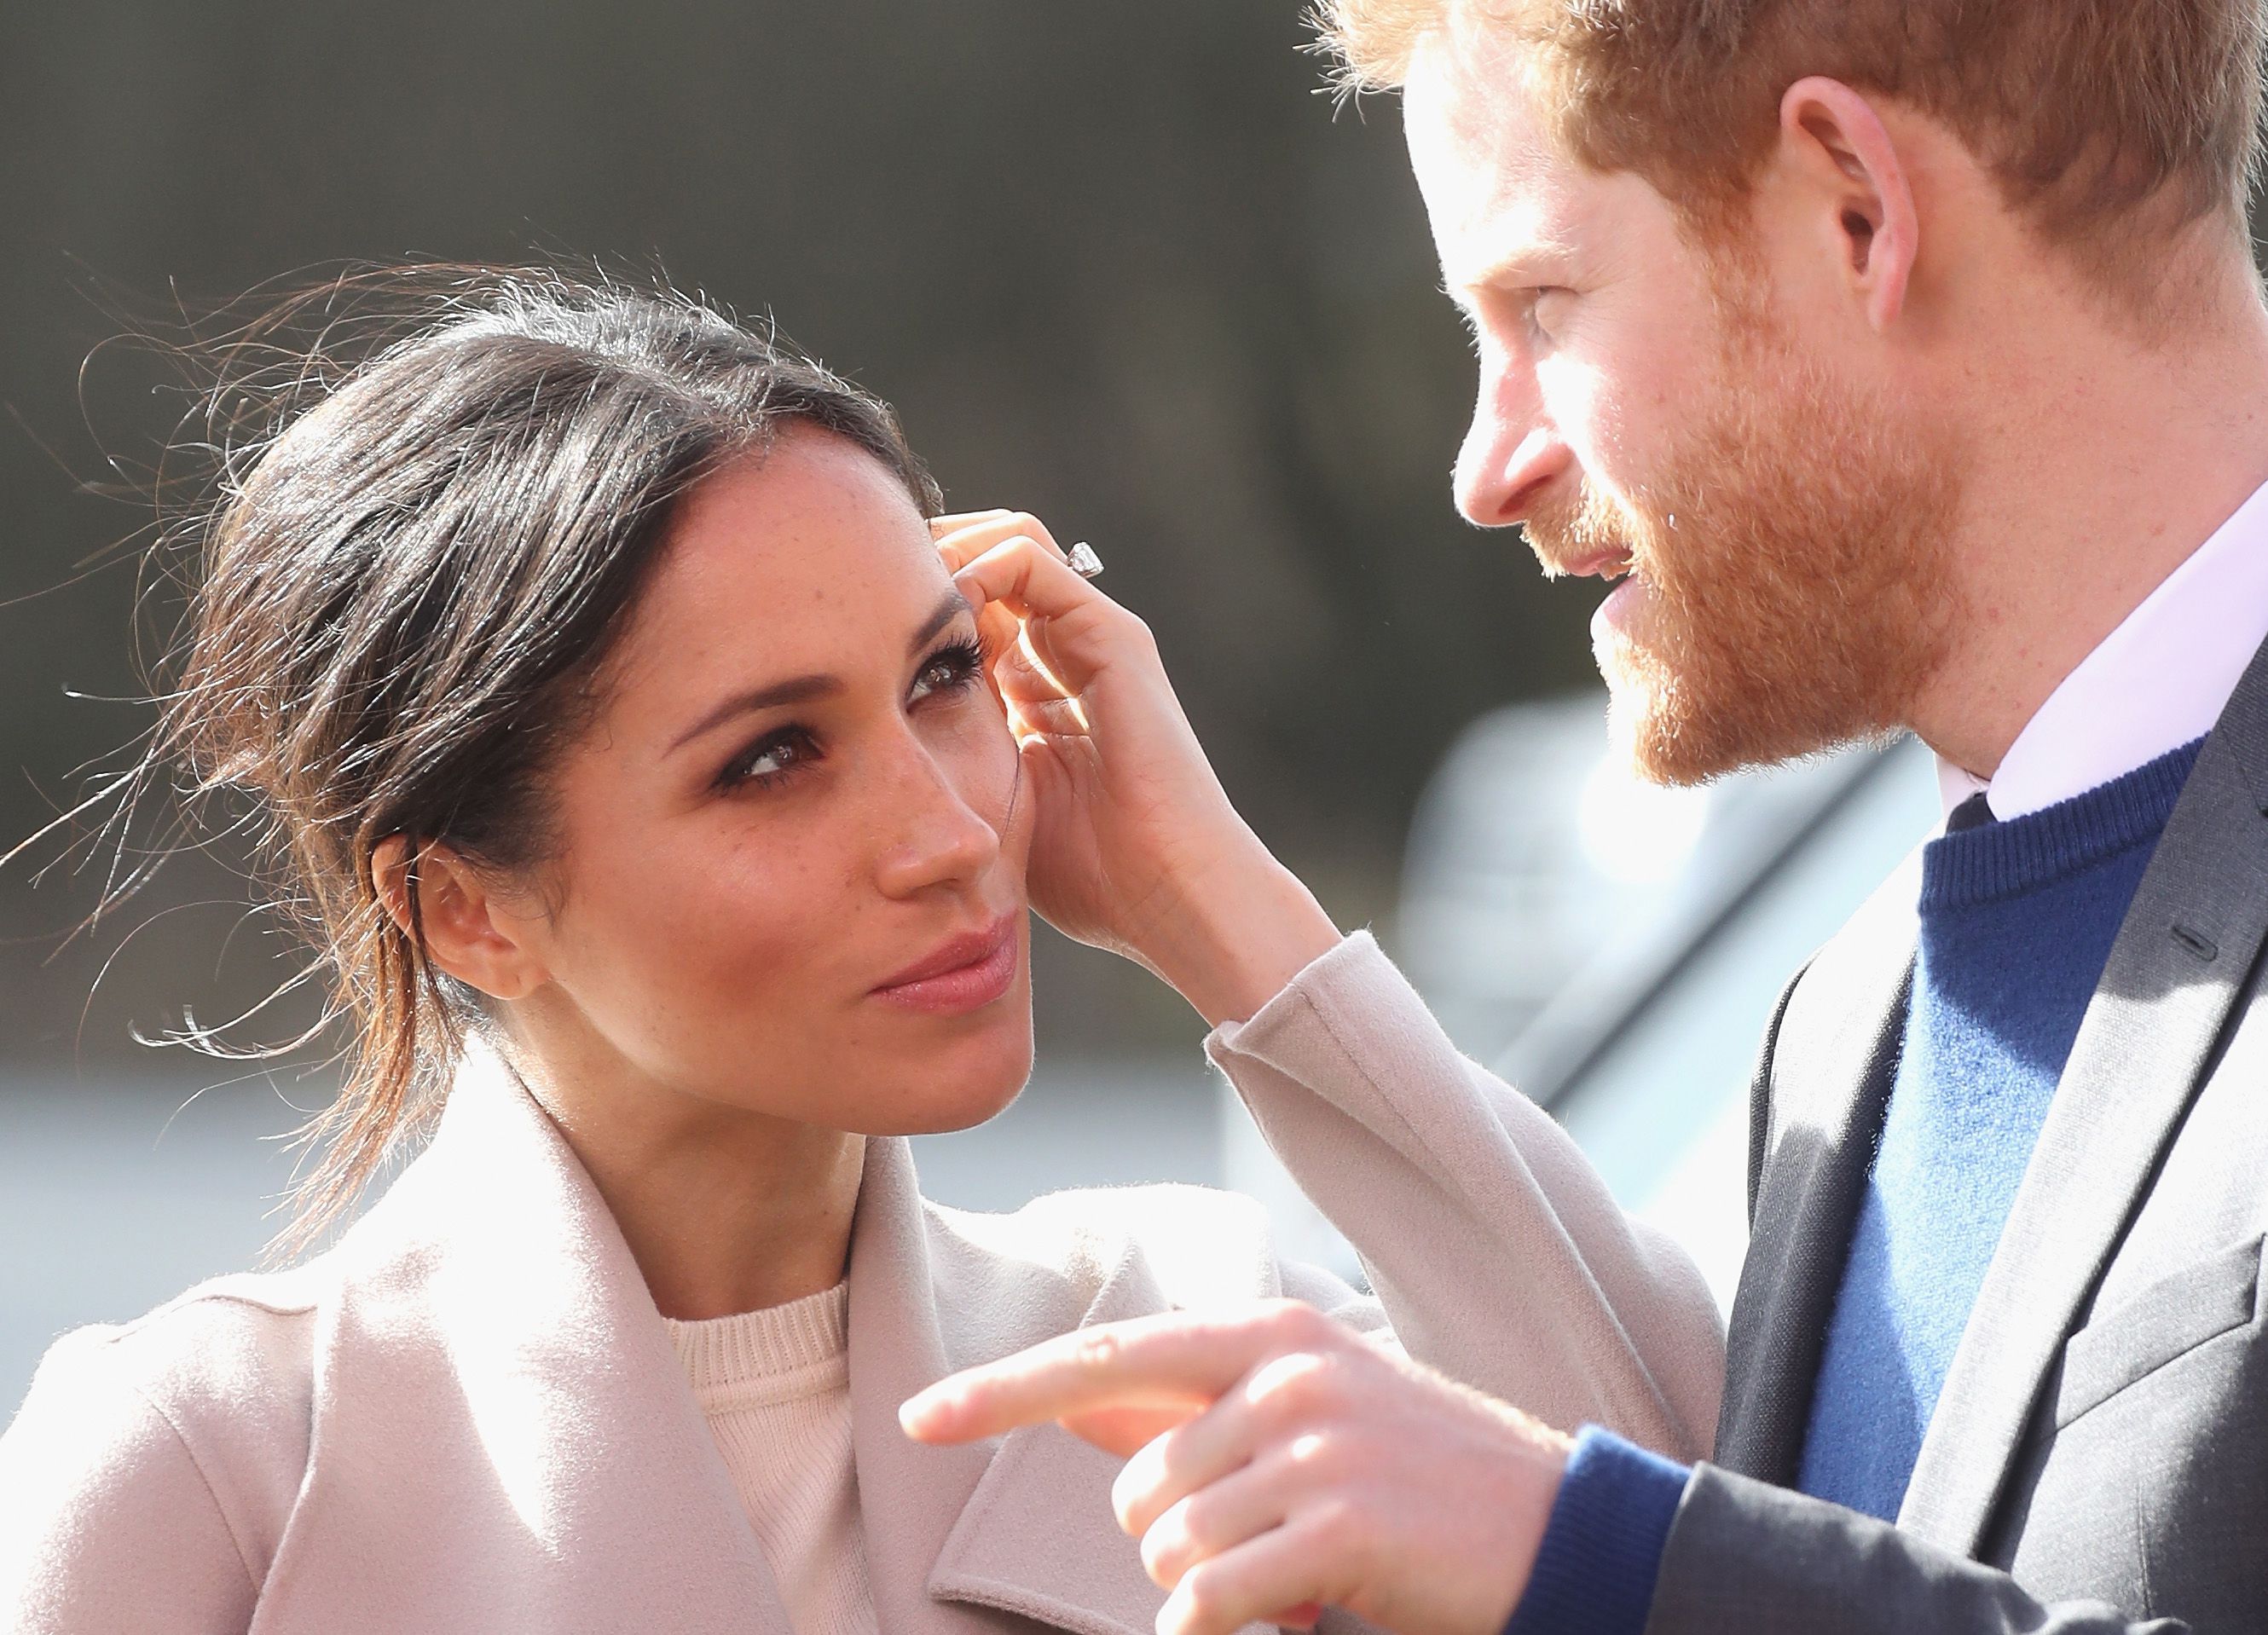 https://hips.hearstapps.com/hmg-prod.s3.amazonaws.com/images/hbz-prince-harry-meghan-markle-cute-moments-gettyimages-936856406-1523378908.jpg?crop=1xw:1xh;center,top